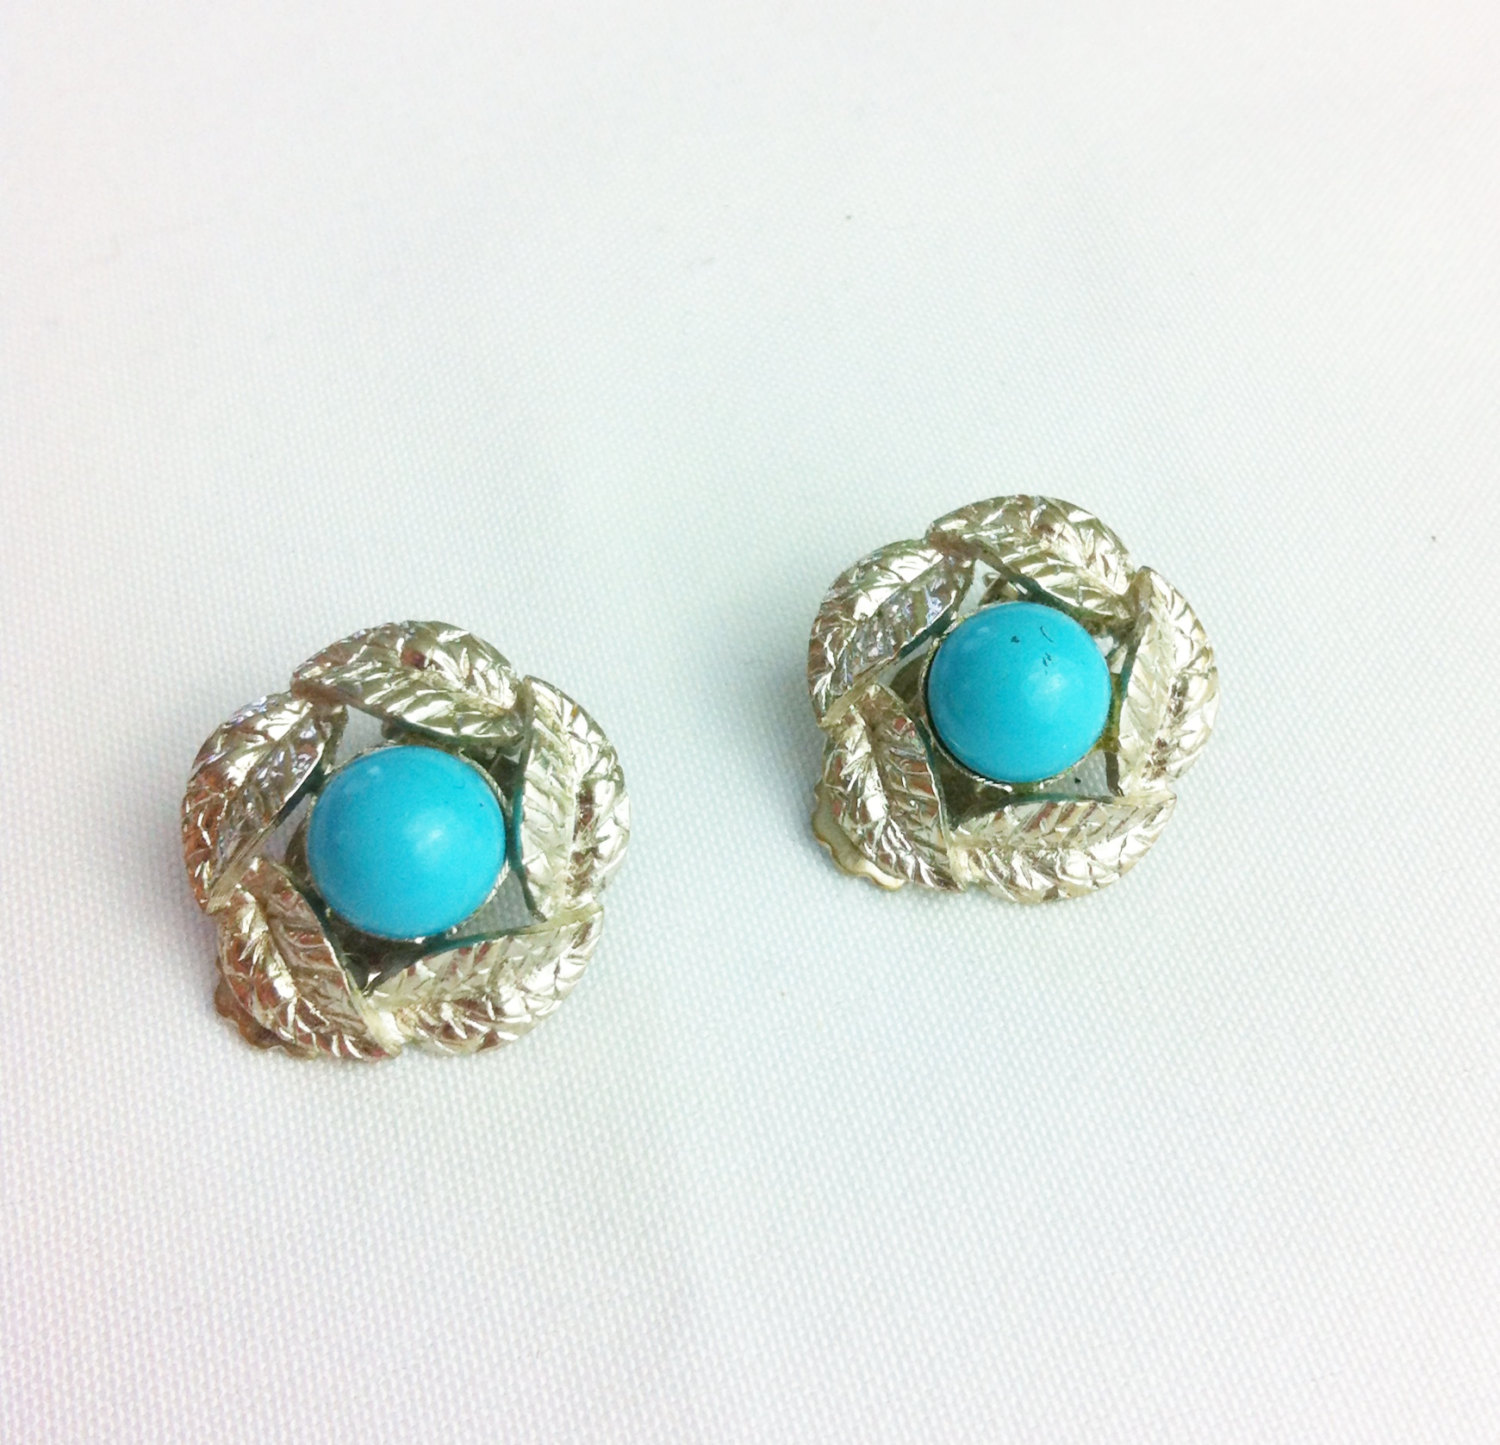 Vintage Silver Leaf Clip On Earrings with Turquoise Bead - Robin's Egg ...